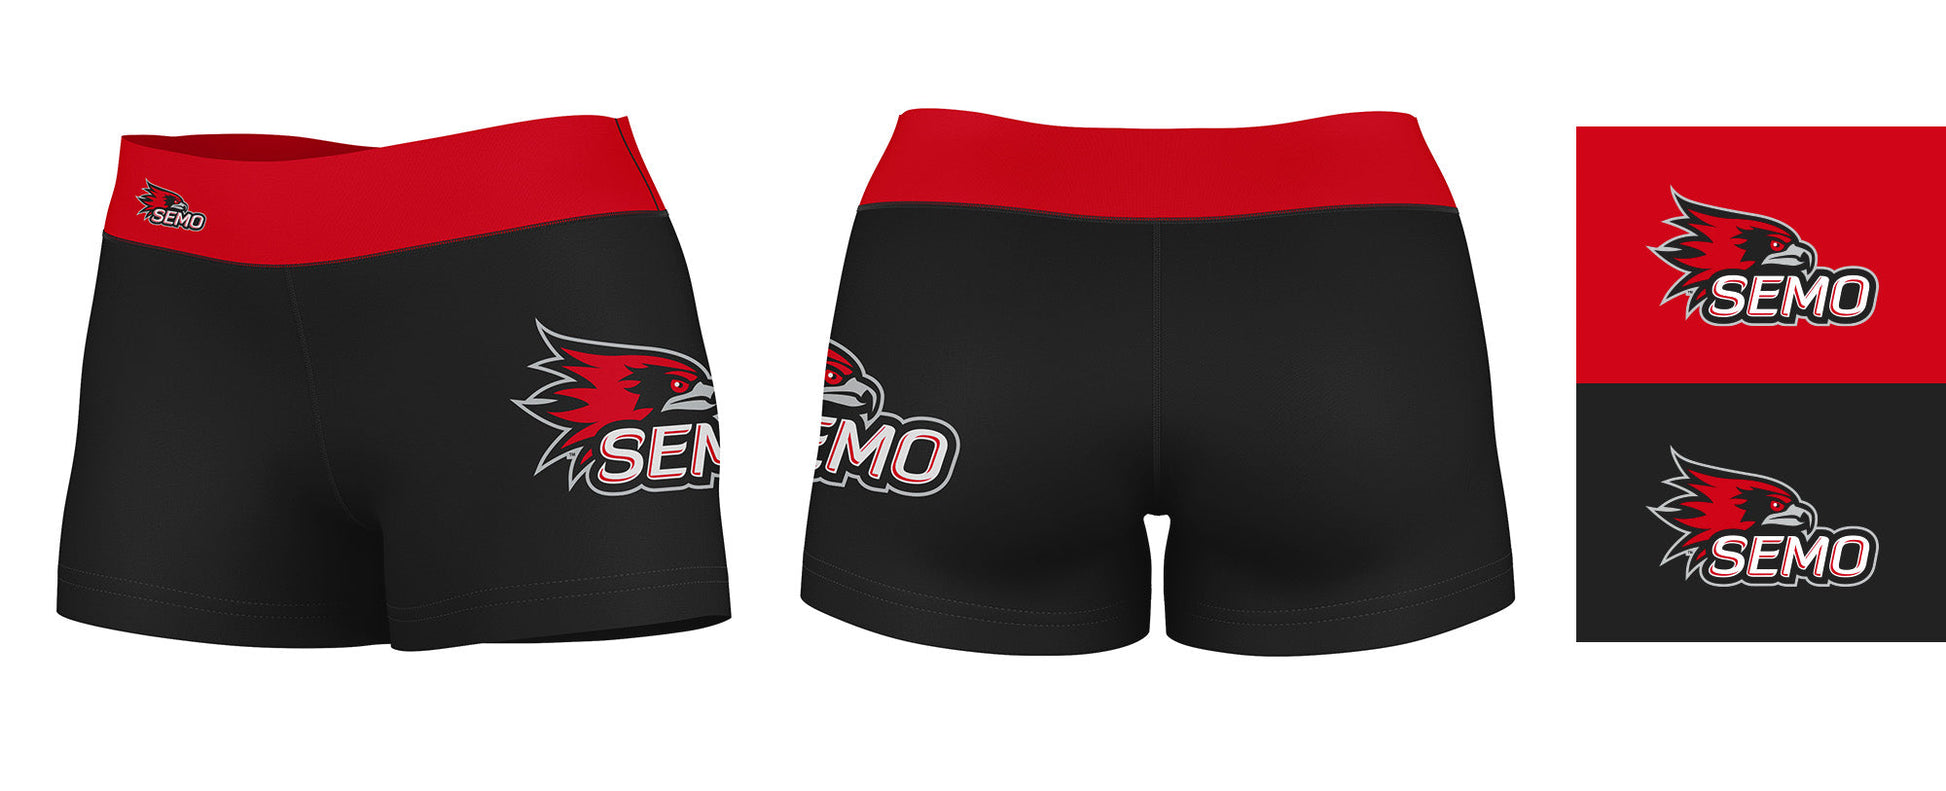 SEMO Redhawks Vive La Fete Game Day Logo on Thigh and Waistband Black & Red Women Yoga Booty Workout Shorts 3.75 Inseam" - Vive La F̻te - Online Apparel Store